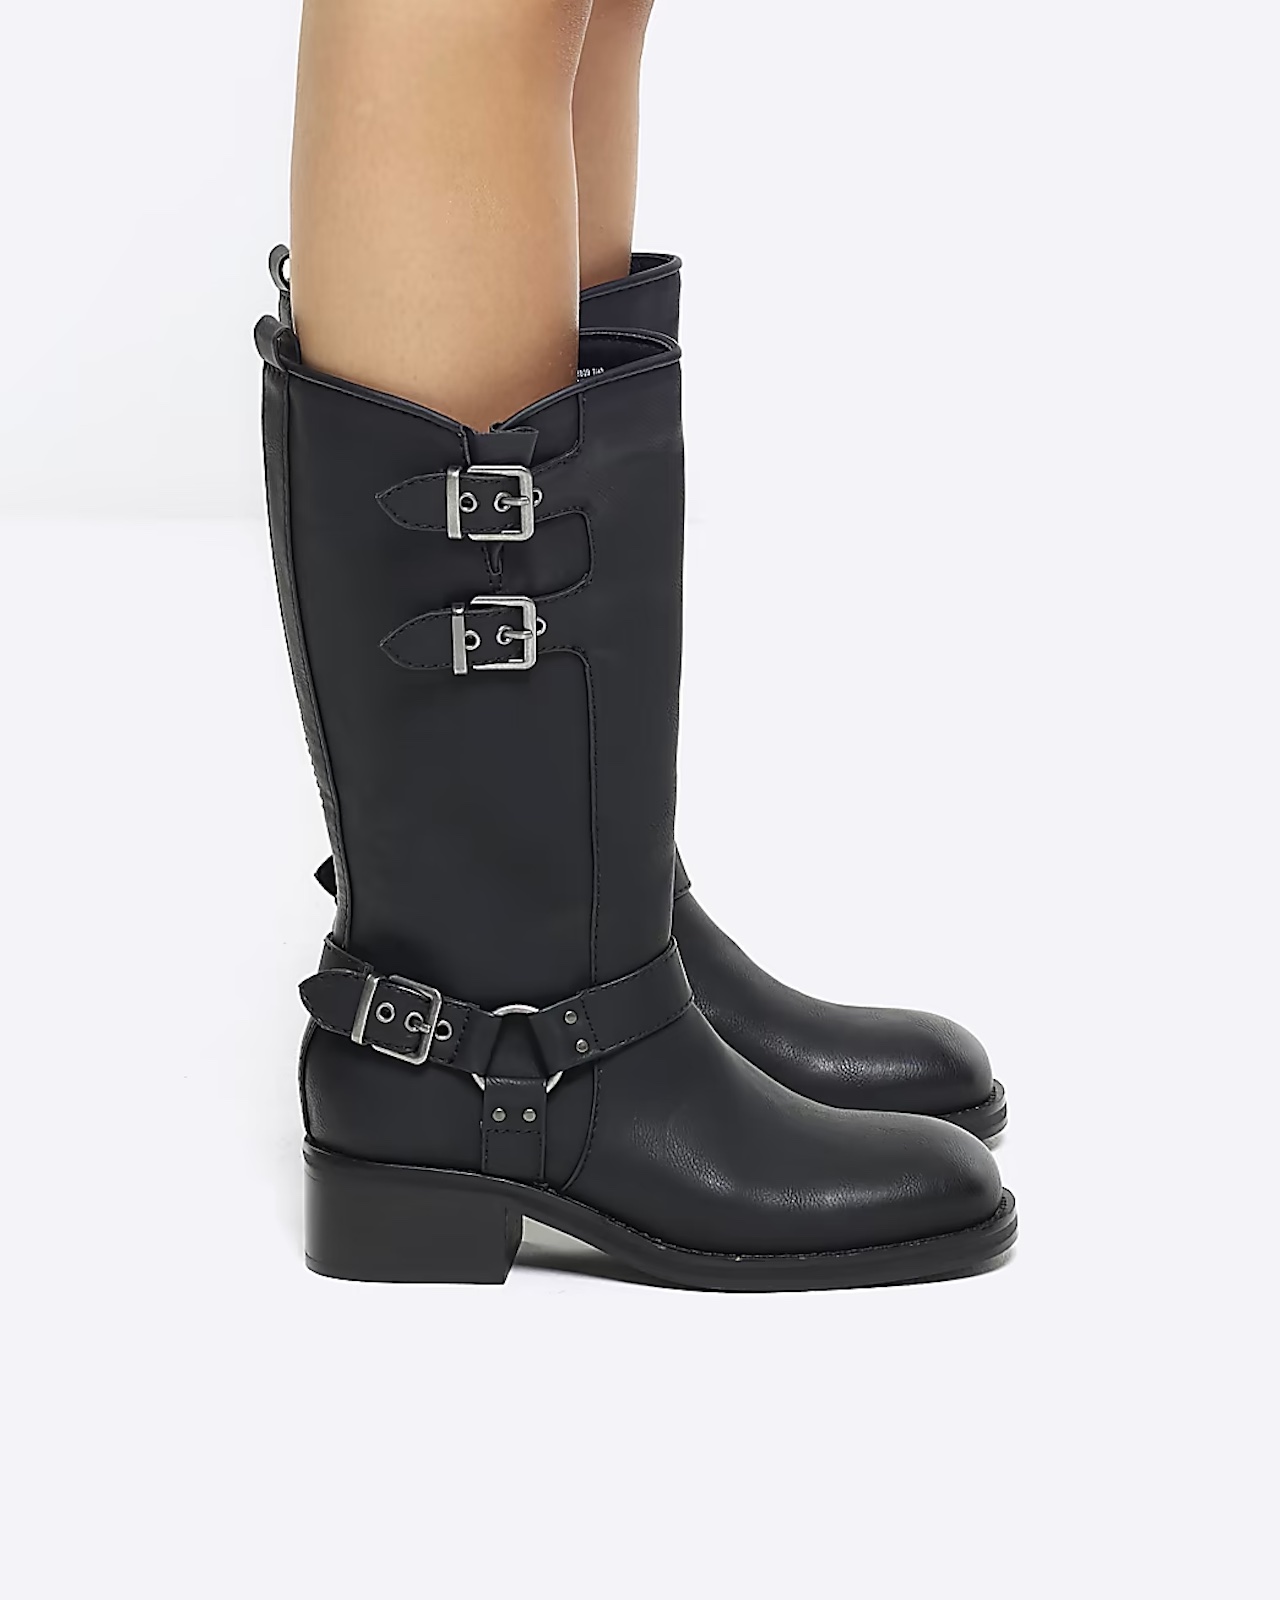 Biker Boots: 7 Styles That You Will Want This Autumn